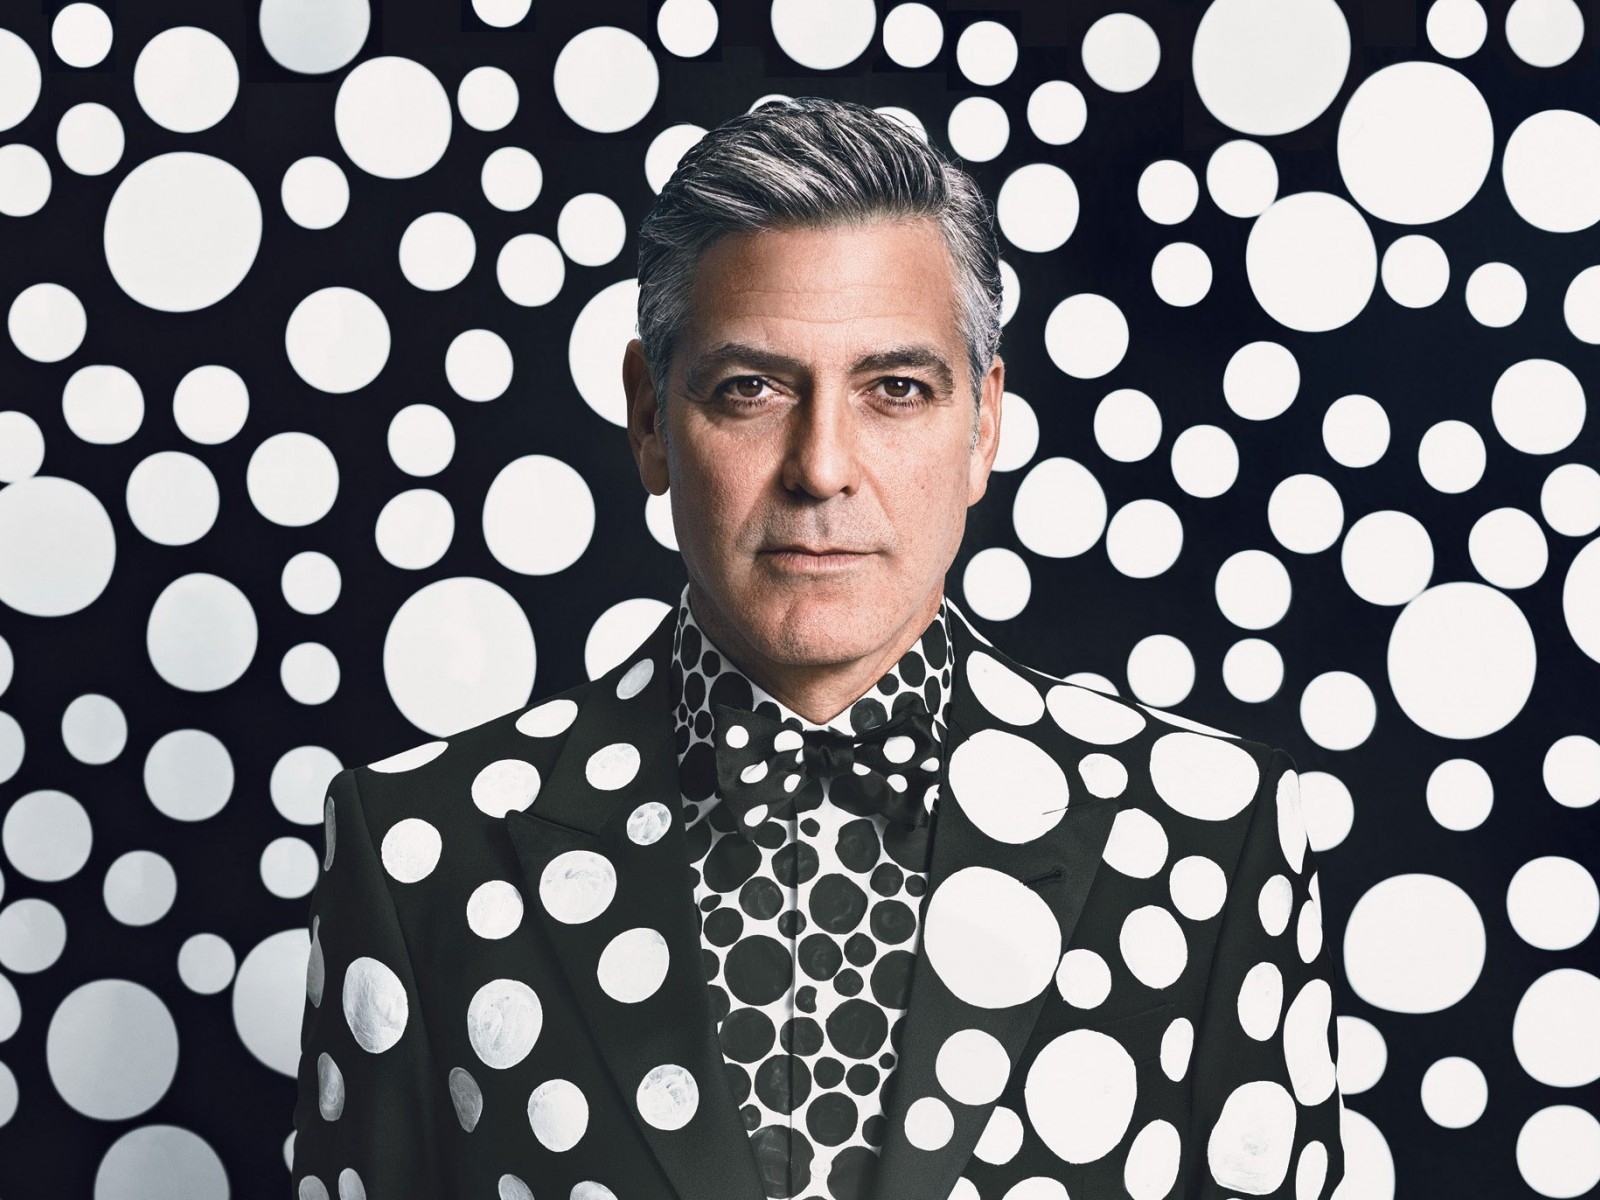 George Clooney Portrait for 1600 x 1200 resolution